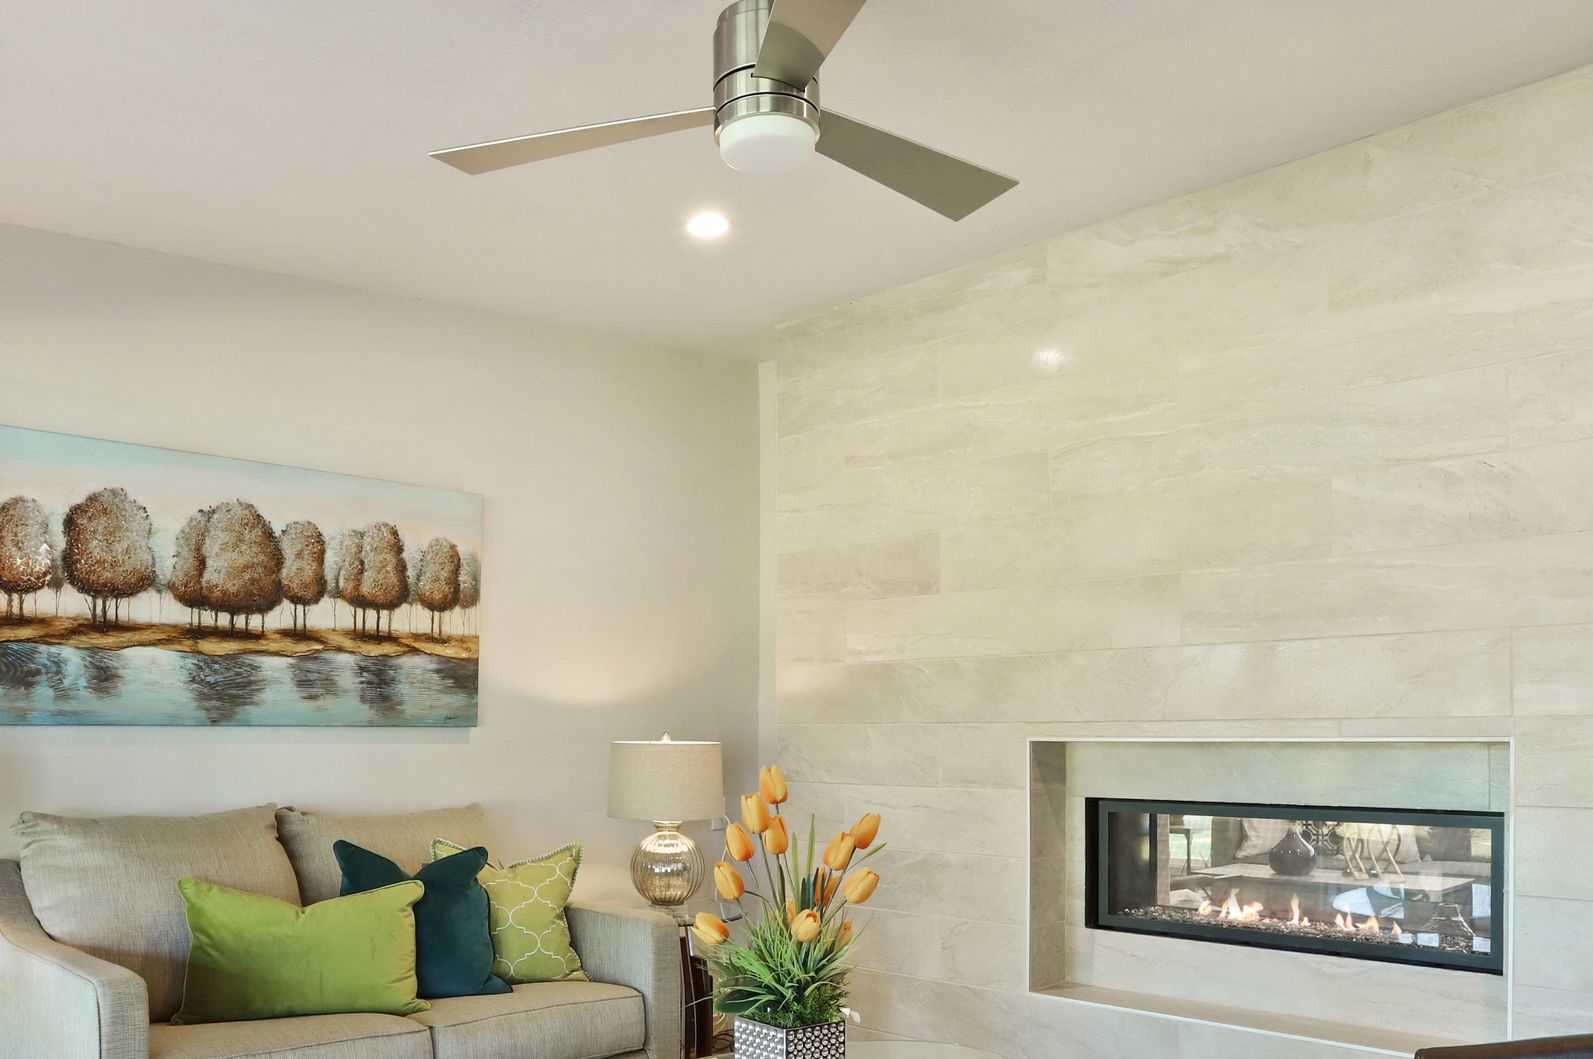 A linear fireplace adds warmth and design.
Tile Wall Fireplace 